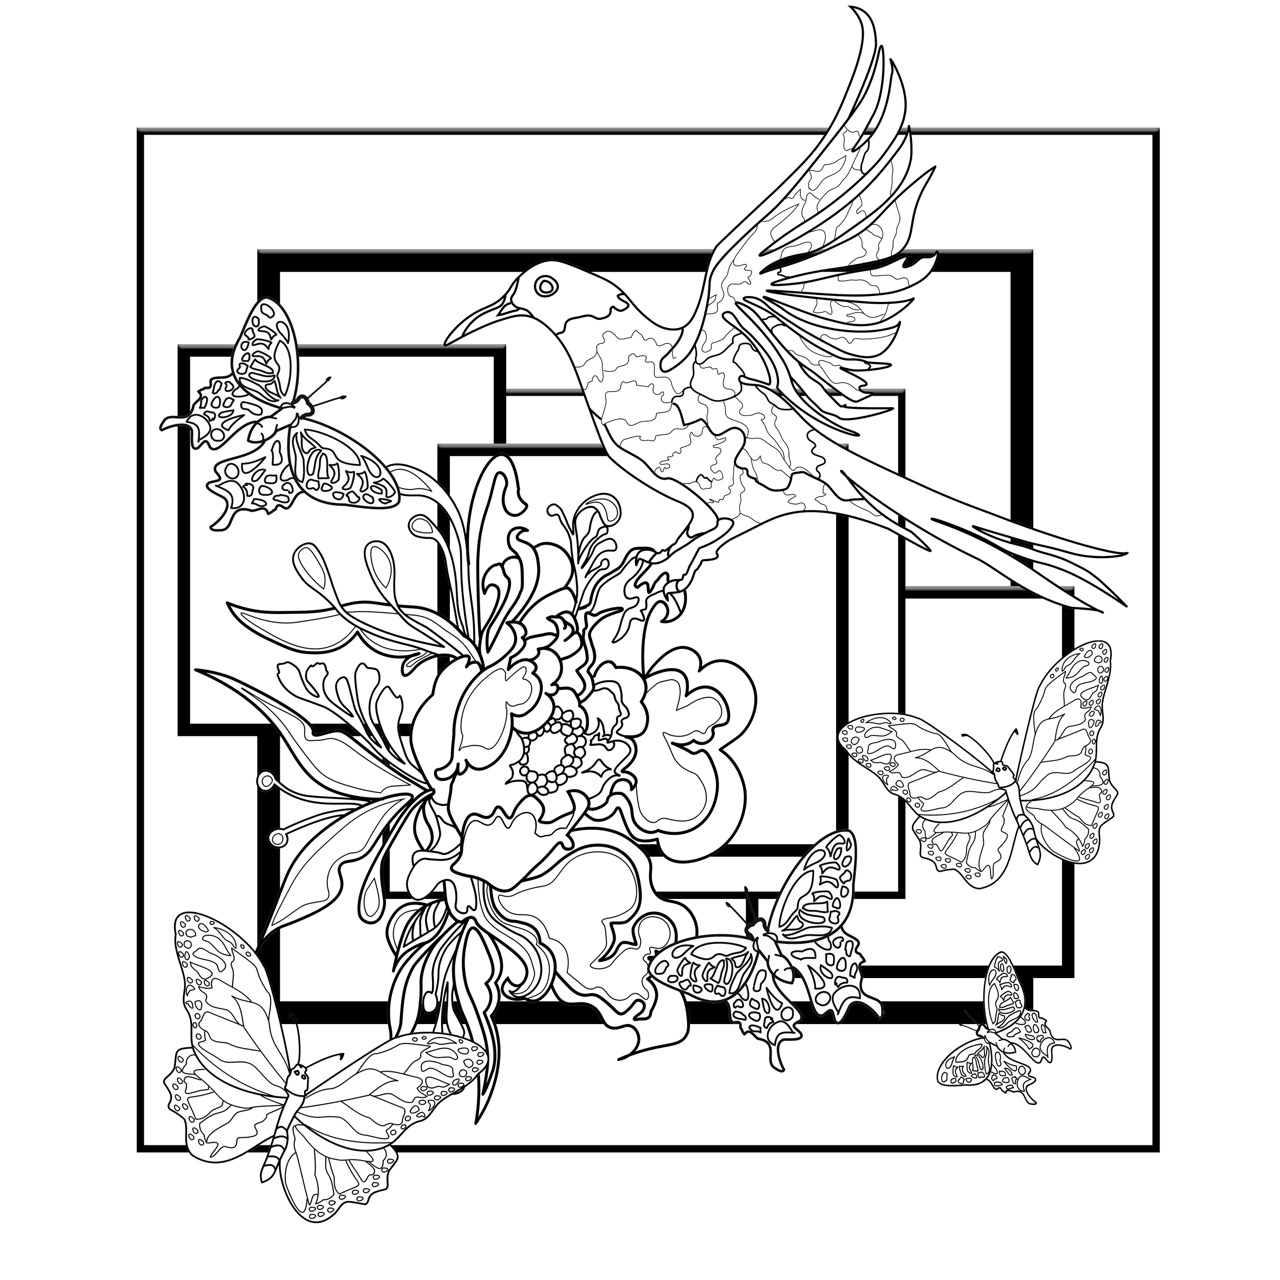 Bird, butterflies and flowers. Pretty coloring page with a bird, butterflies and a pretty flower, Artist : Morgan